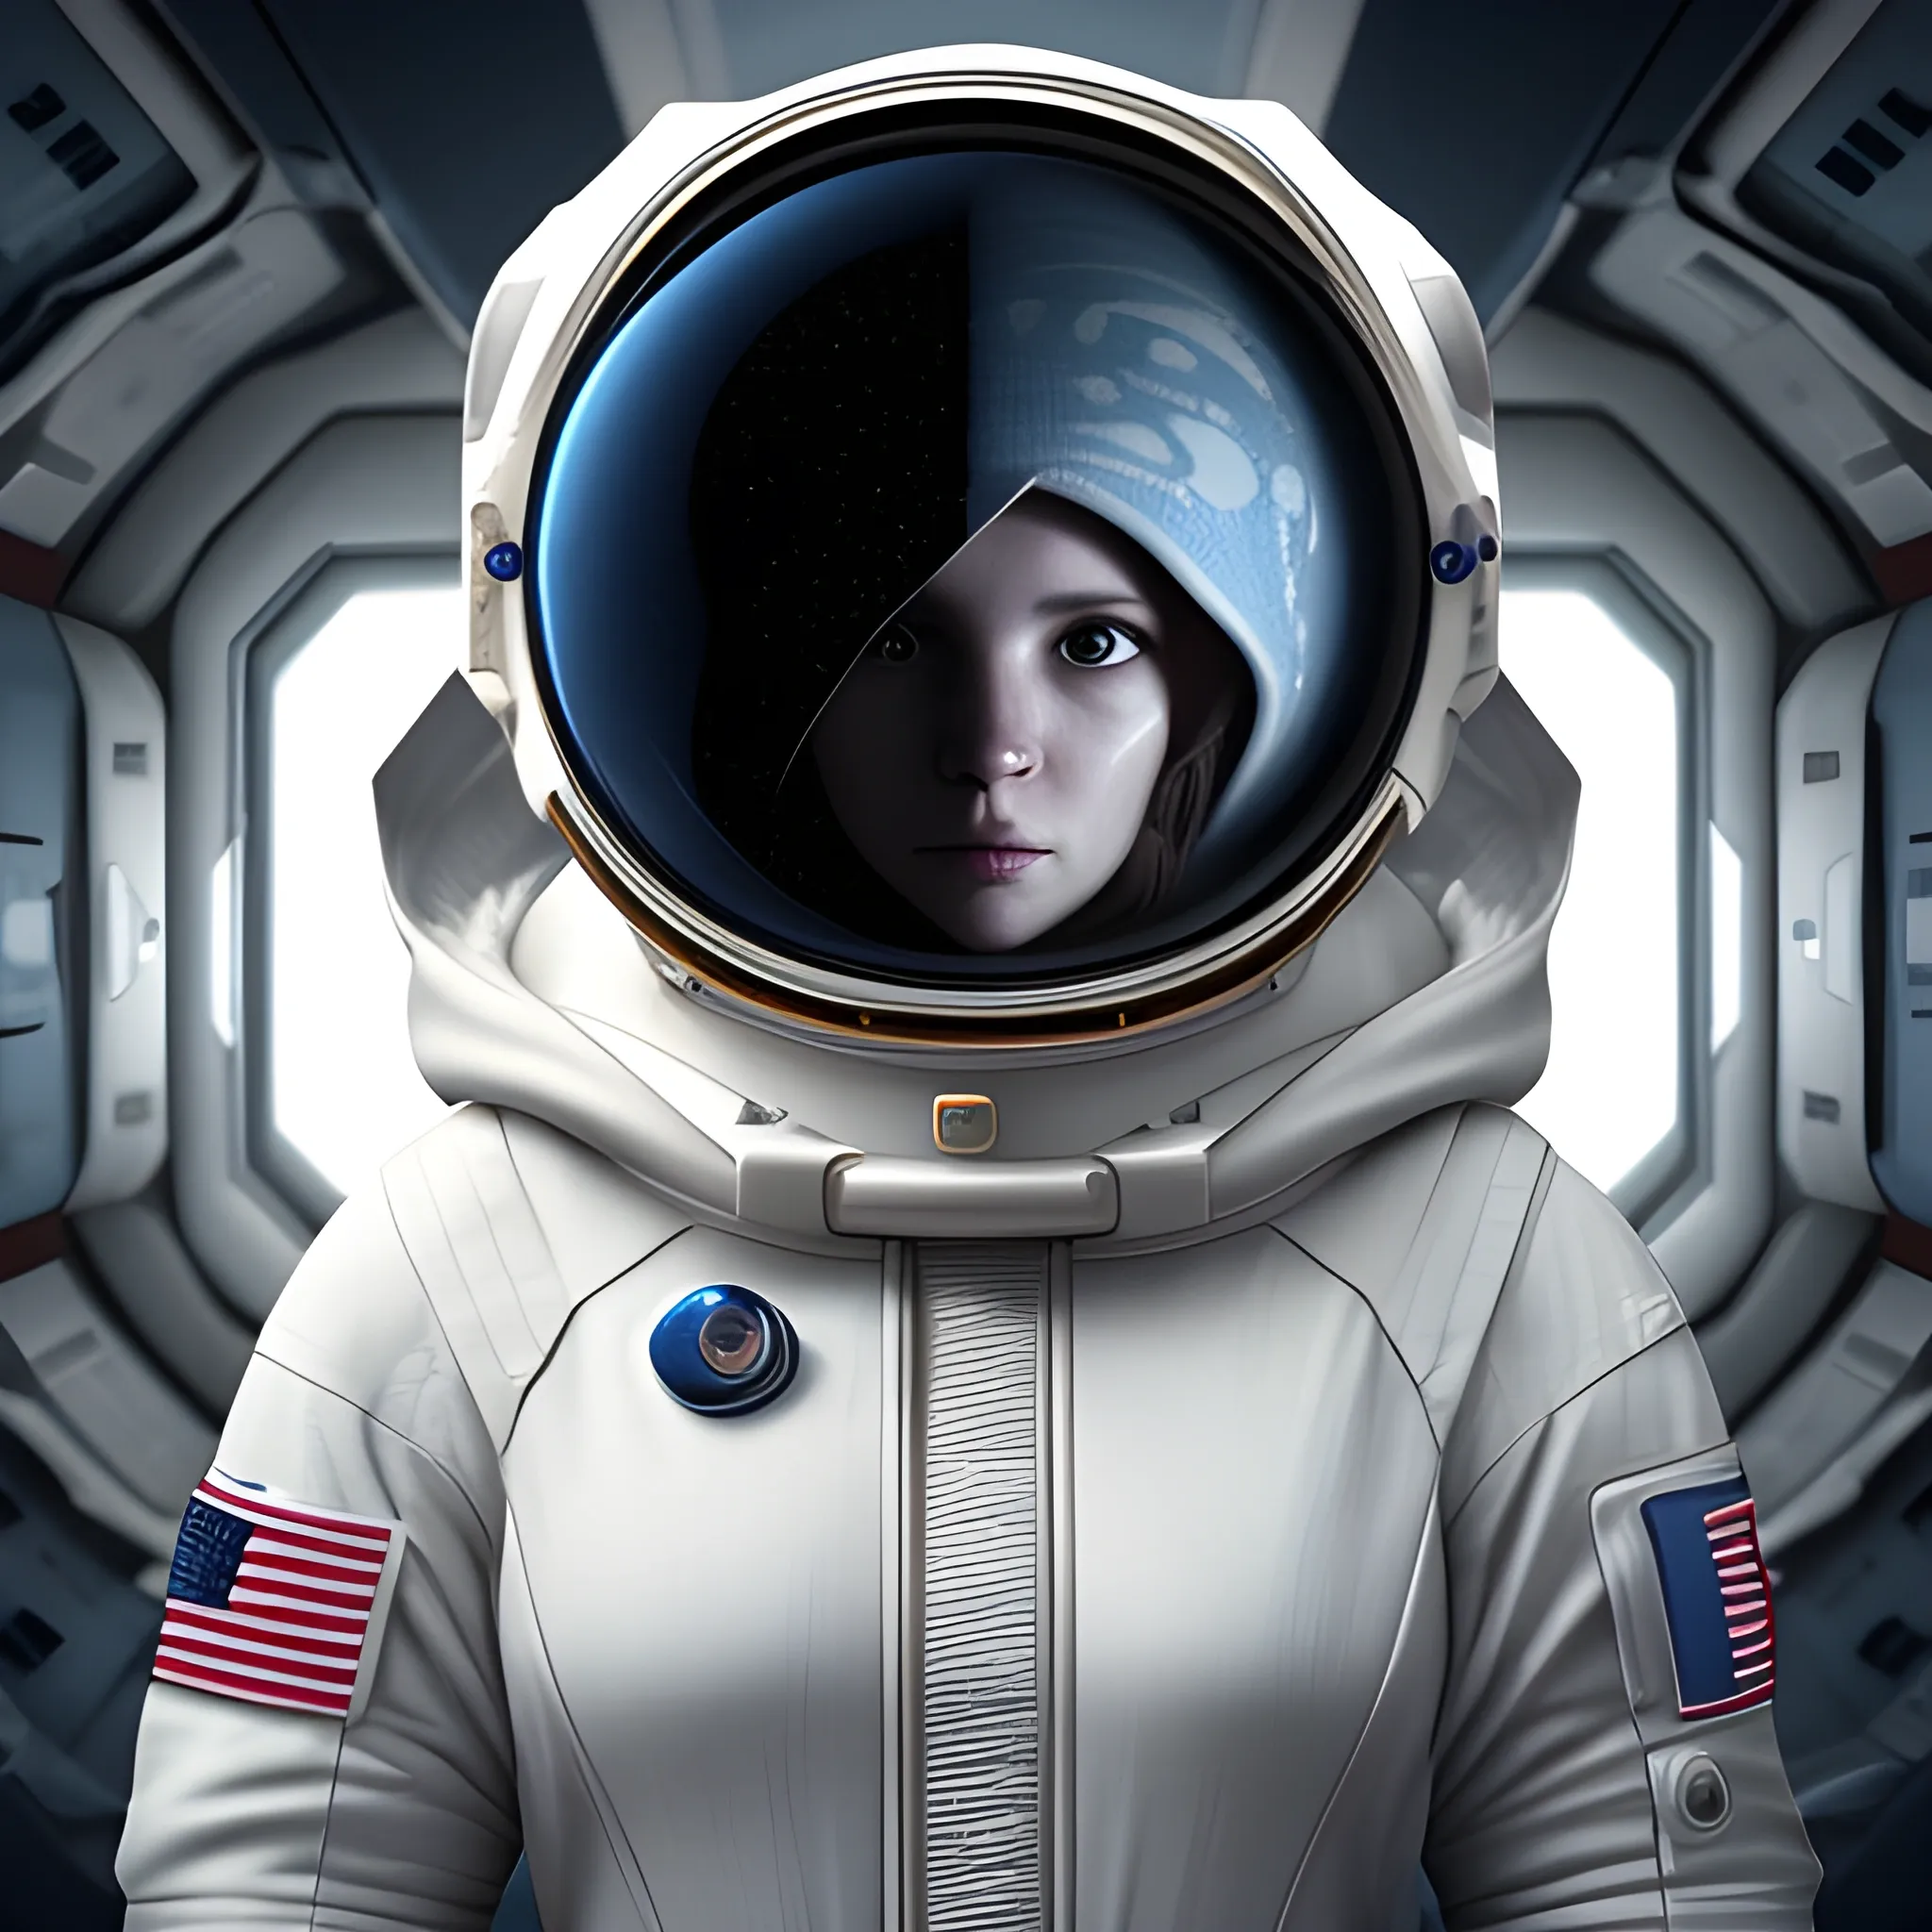 The image features a woman wearing a white hooded outfit, which appears to be a spacesuit. She is standing in a dark room, possibly a space station. The woman is looking directly at the camera, with her face prominently visible in the foreground. The spacesuit has a visor, which is open, allowing the viewer to see her face clearly. The scene gives off a futuristic and space-themed atmosphere., 3D